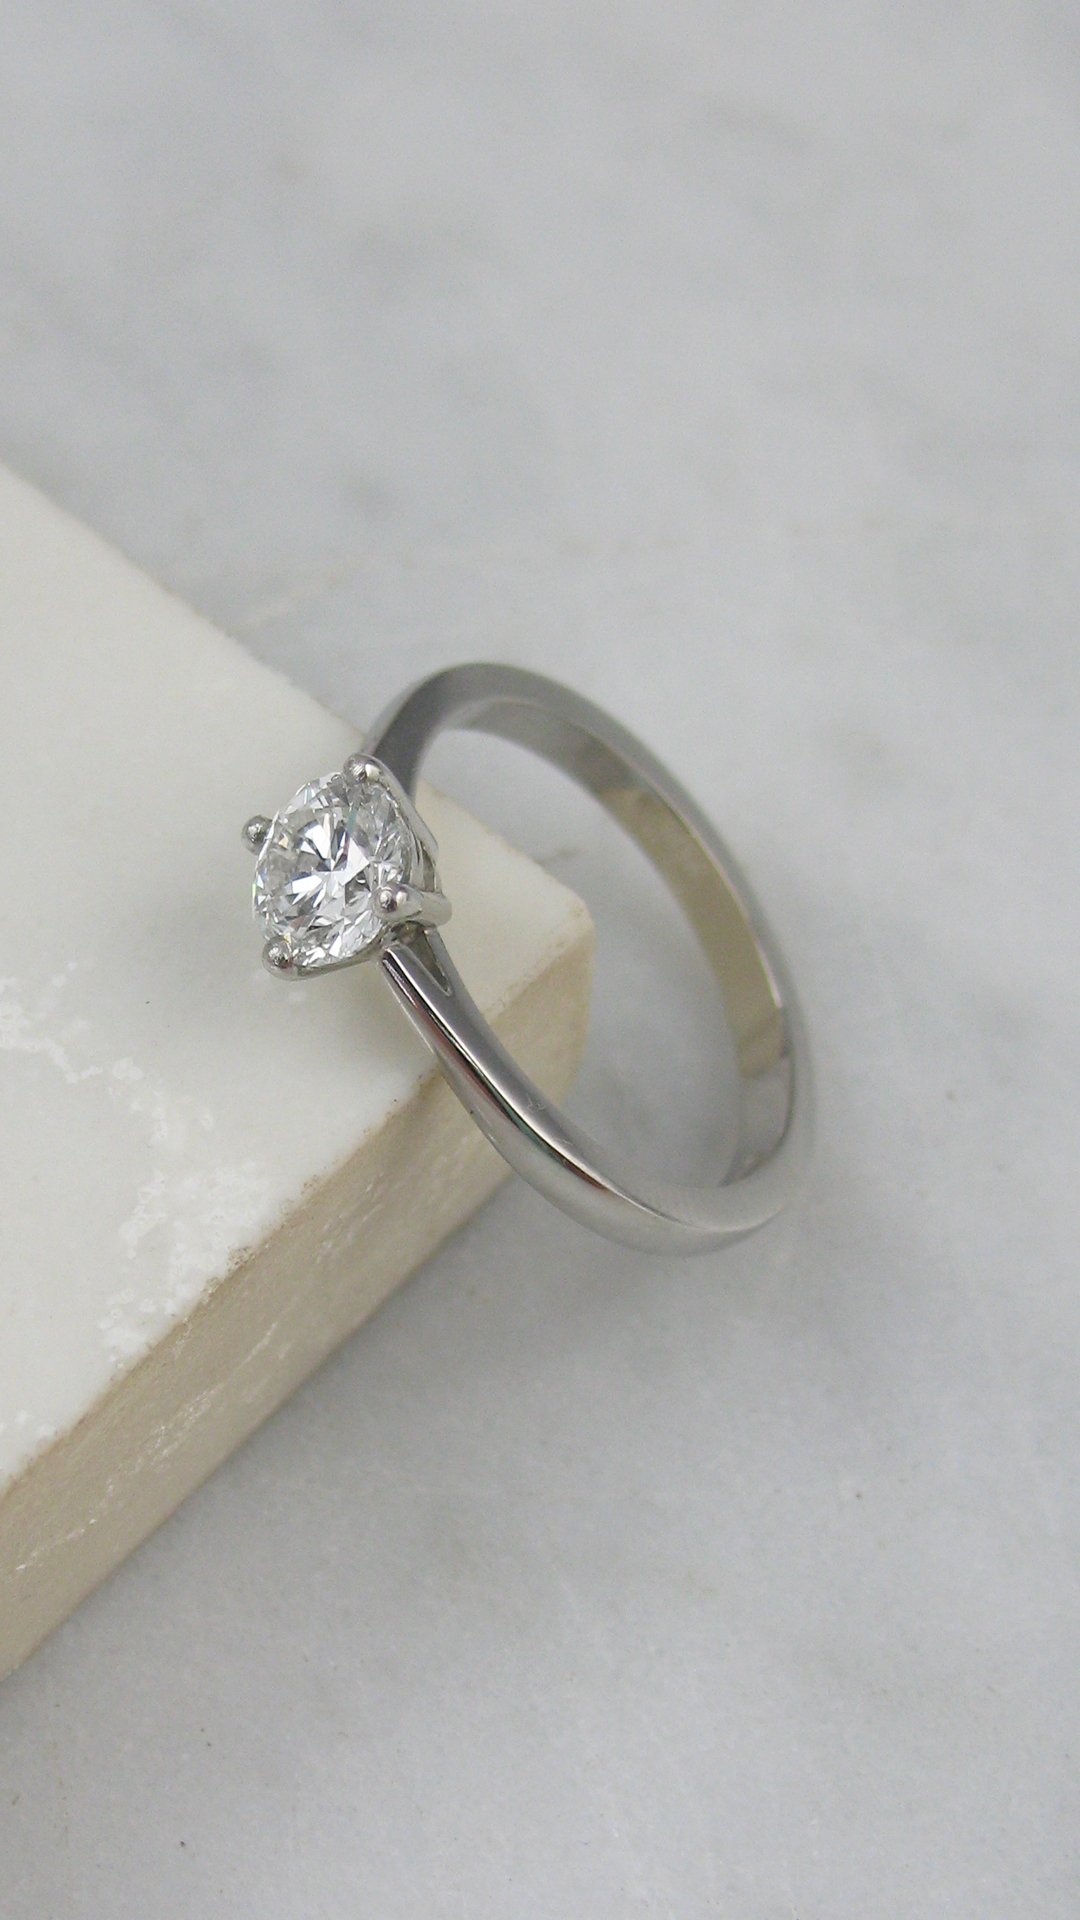 A classic bespoke solitaire diamond ring